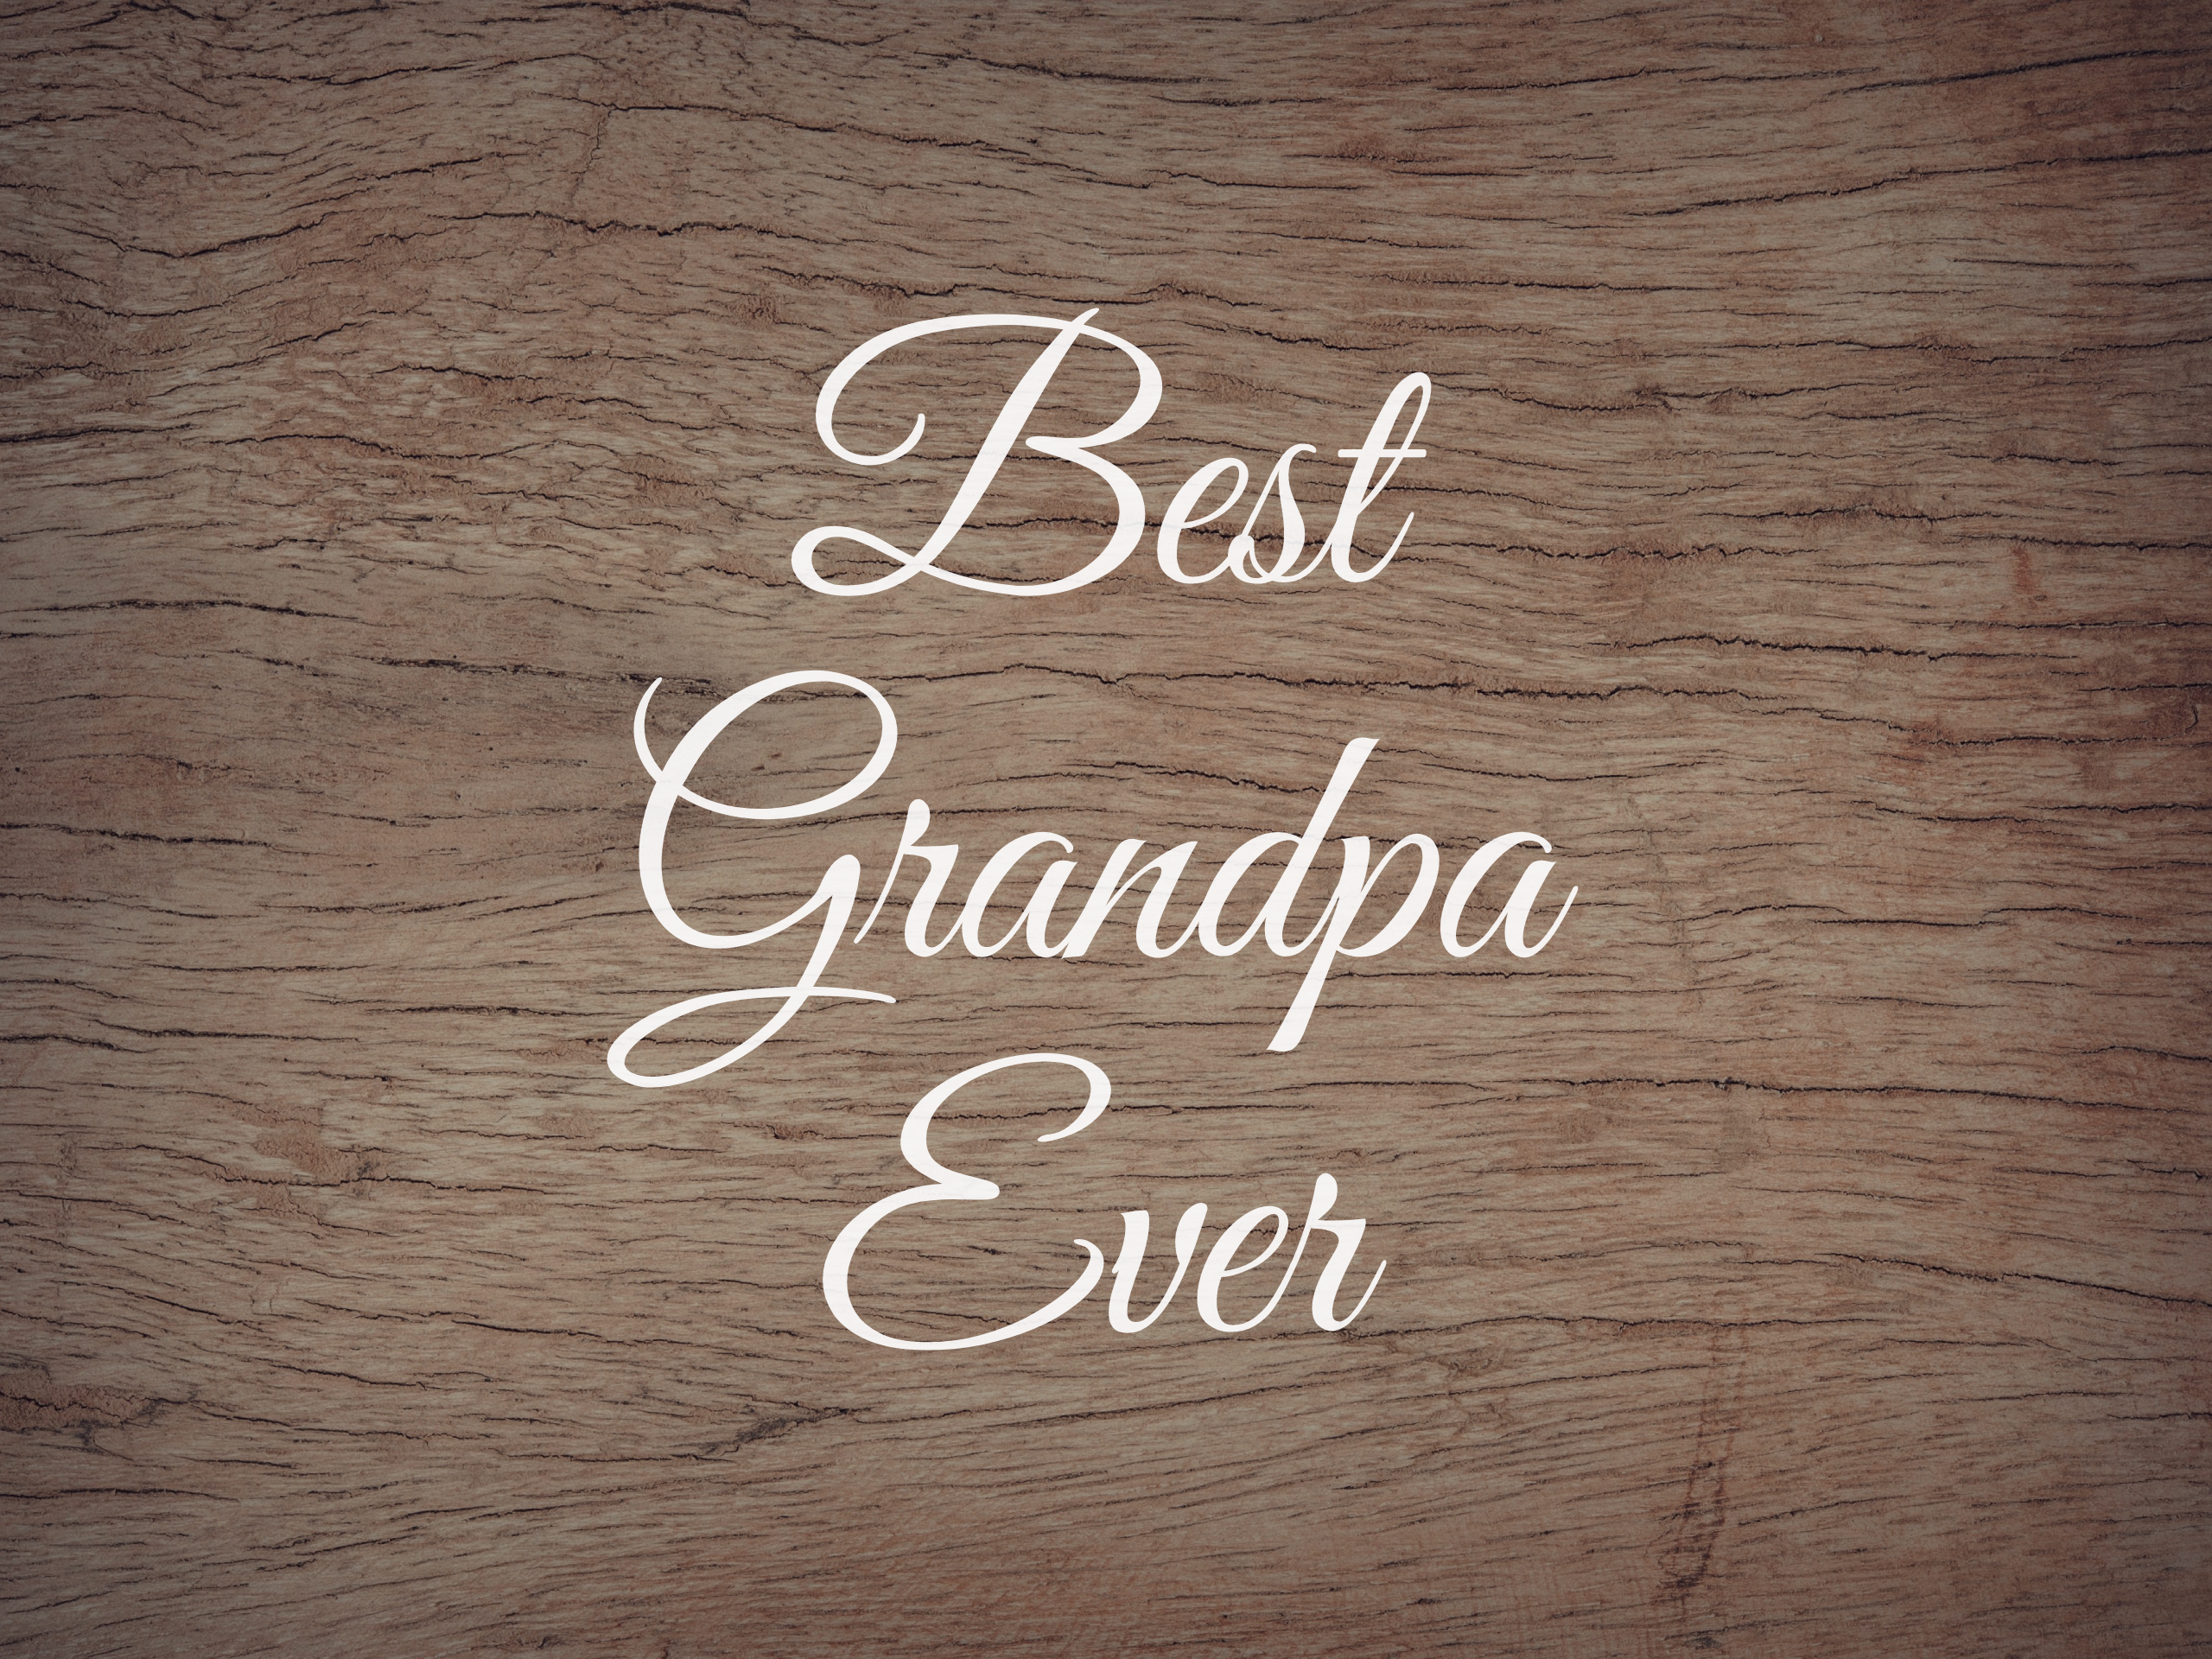 Best Grandpa Ever Decal - Holiday Grandpa/Papa/Gramps/Pop/Father/Dad/Dada/Daddy Vinyl Decals for Home, Gifts, Businesses and More!